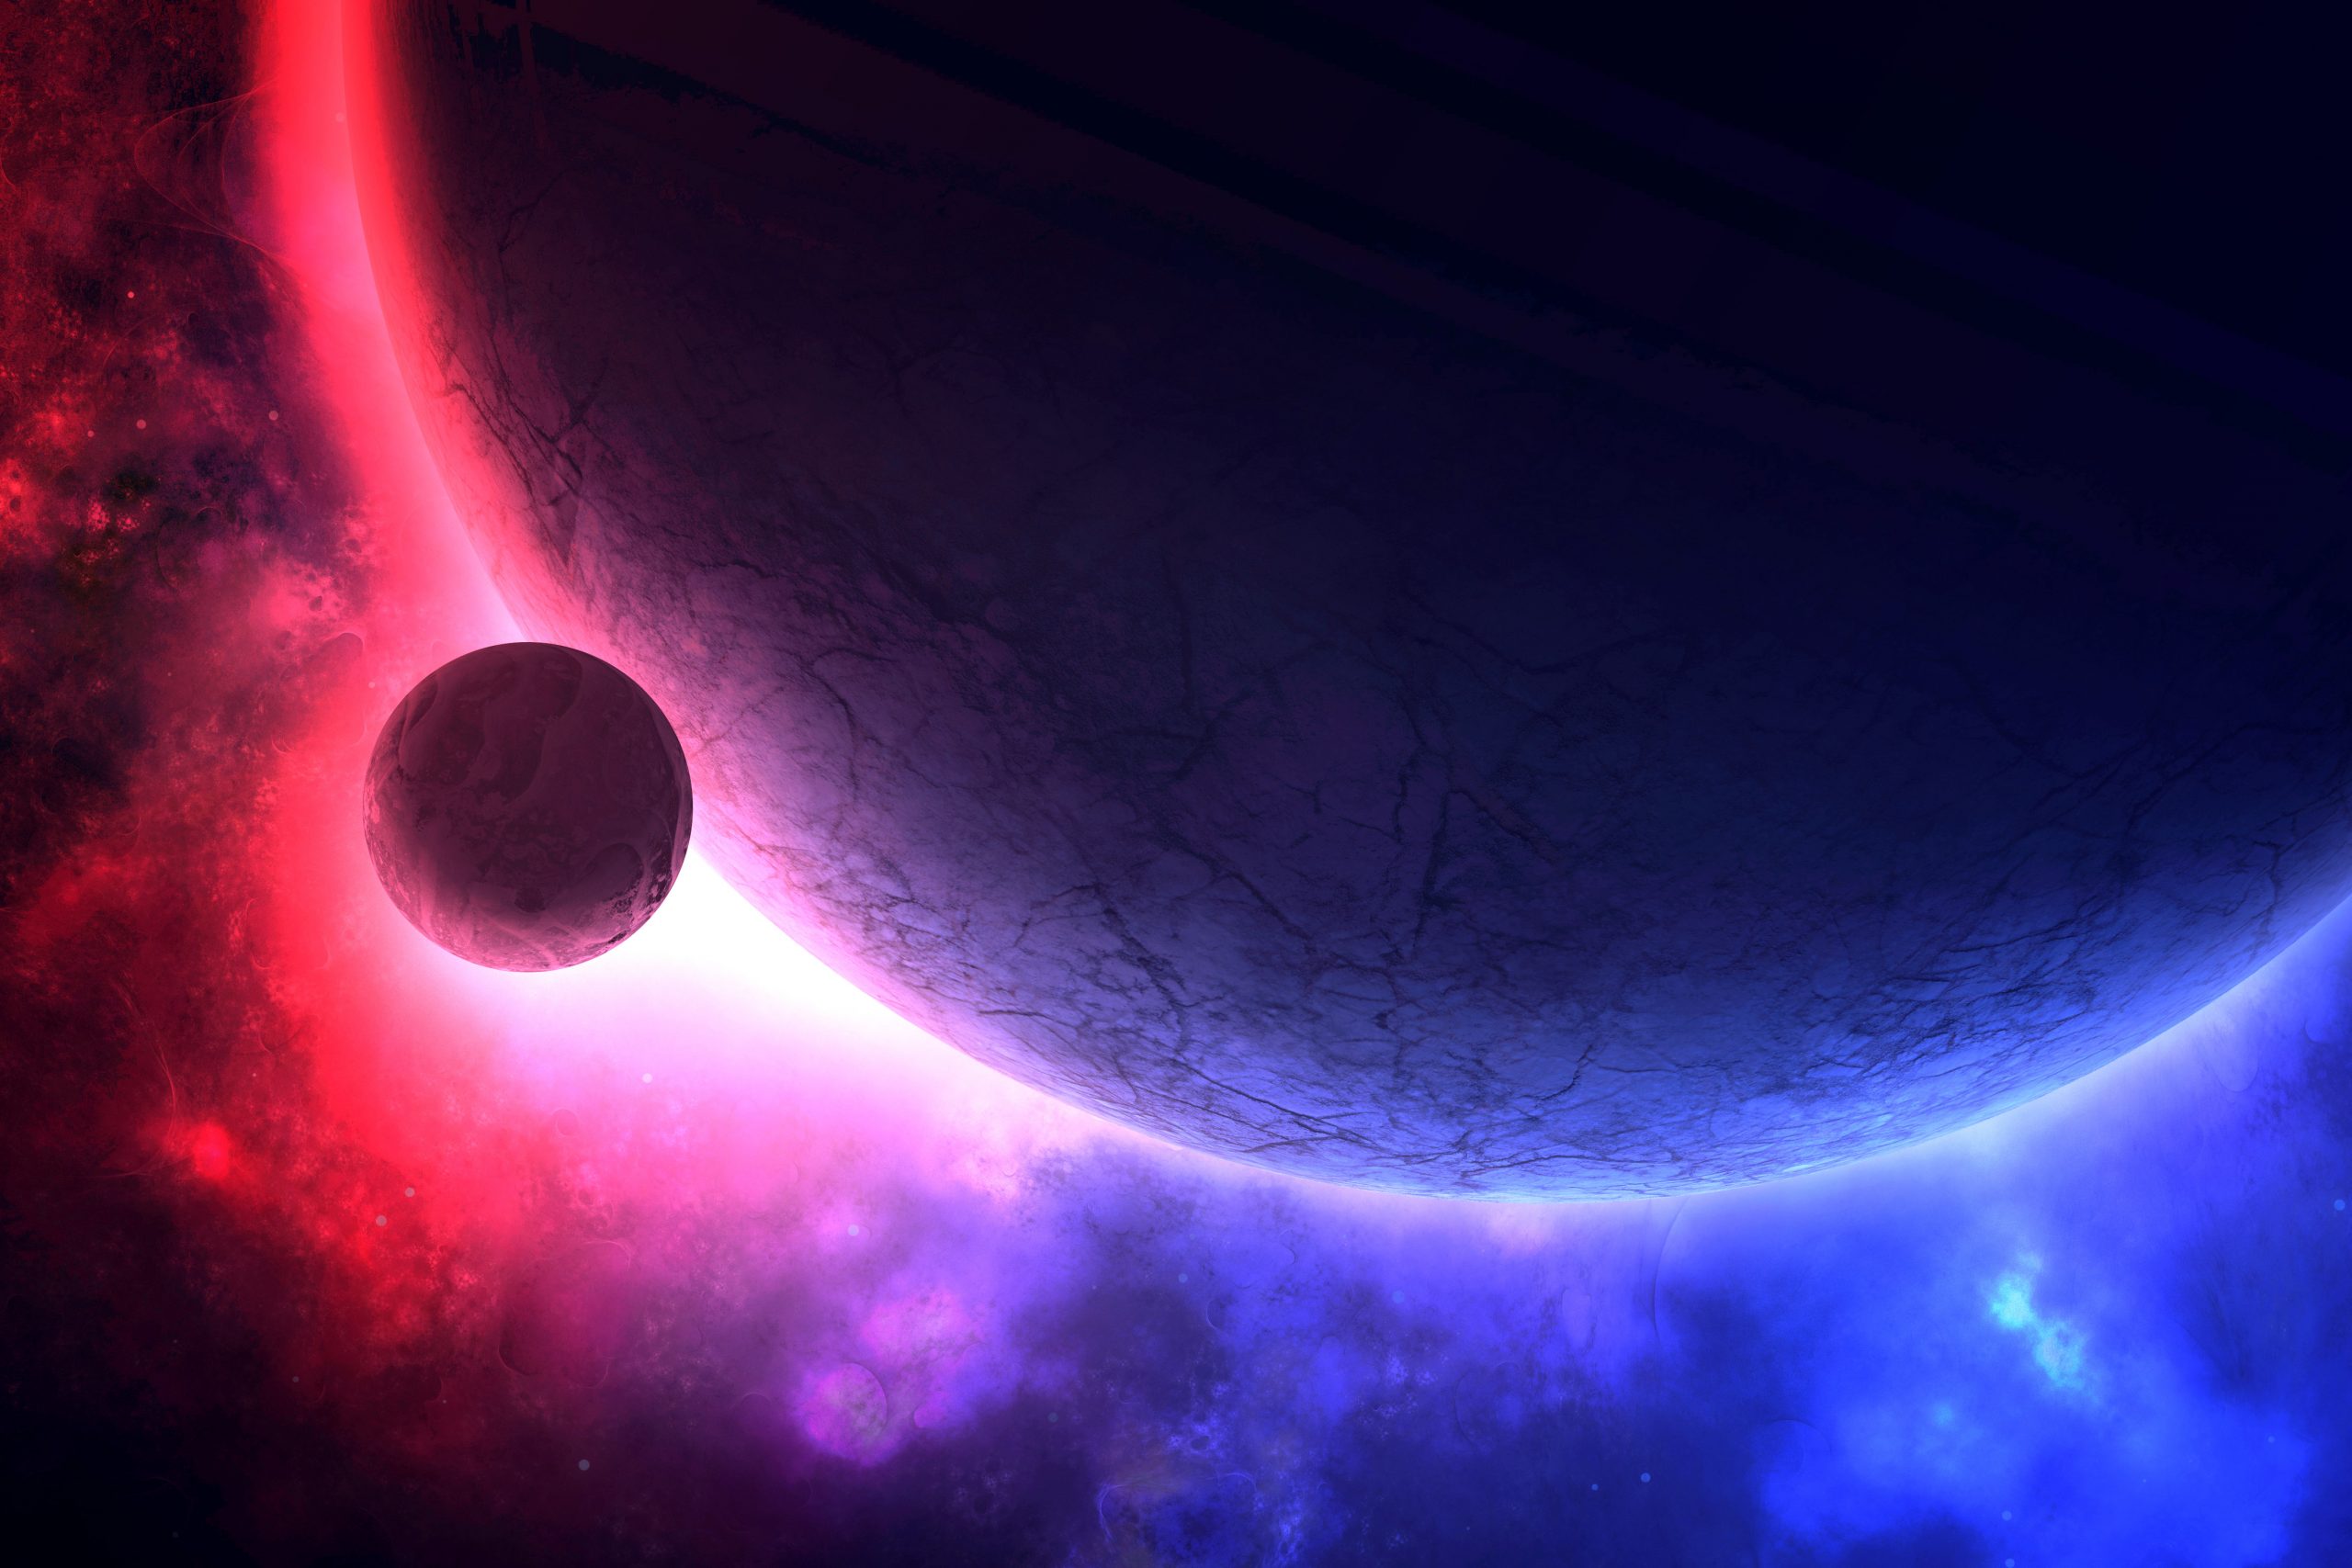 Space background illustration with planet and mood rs4dmg8